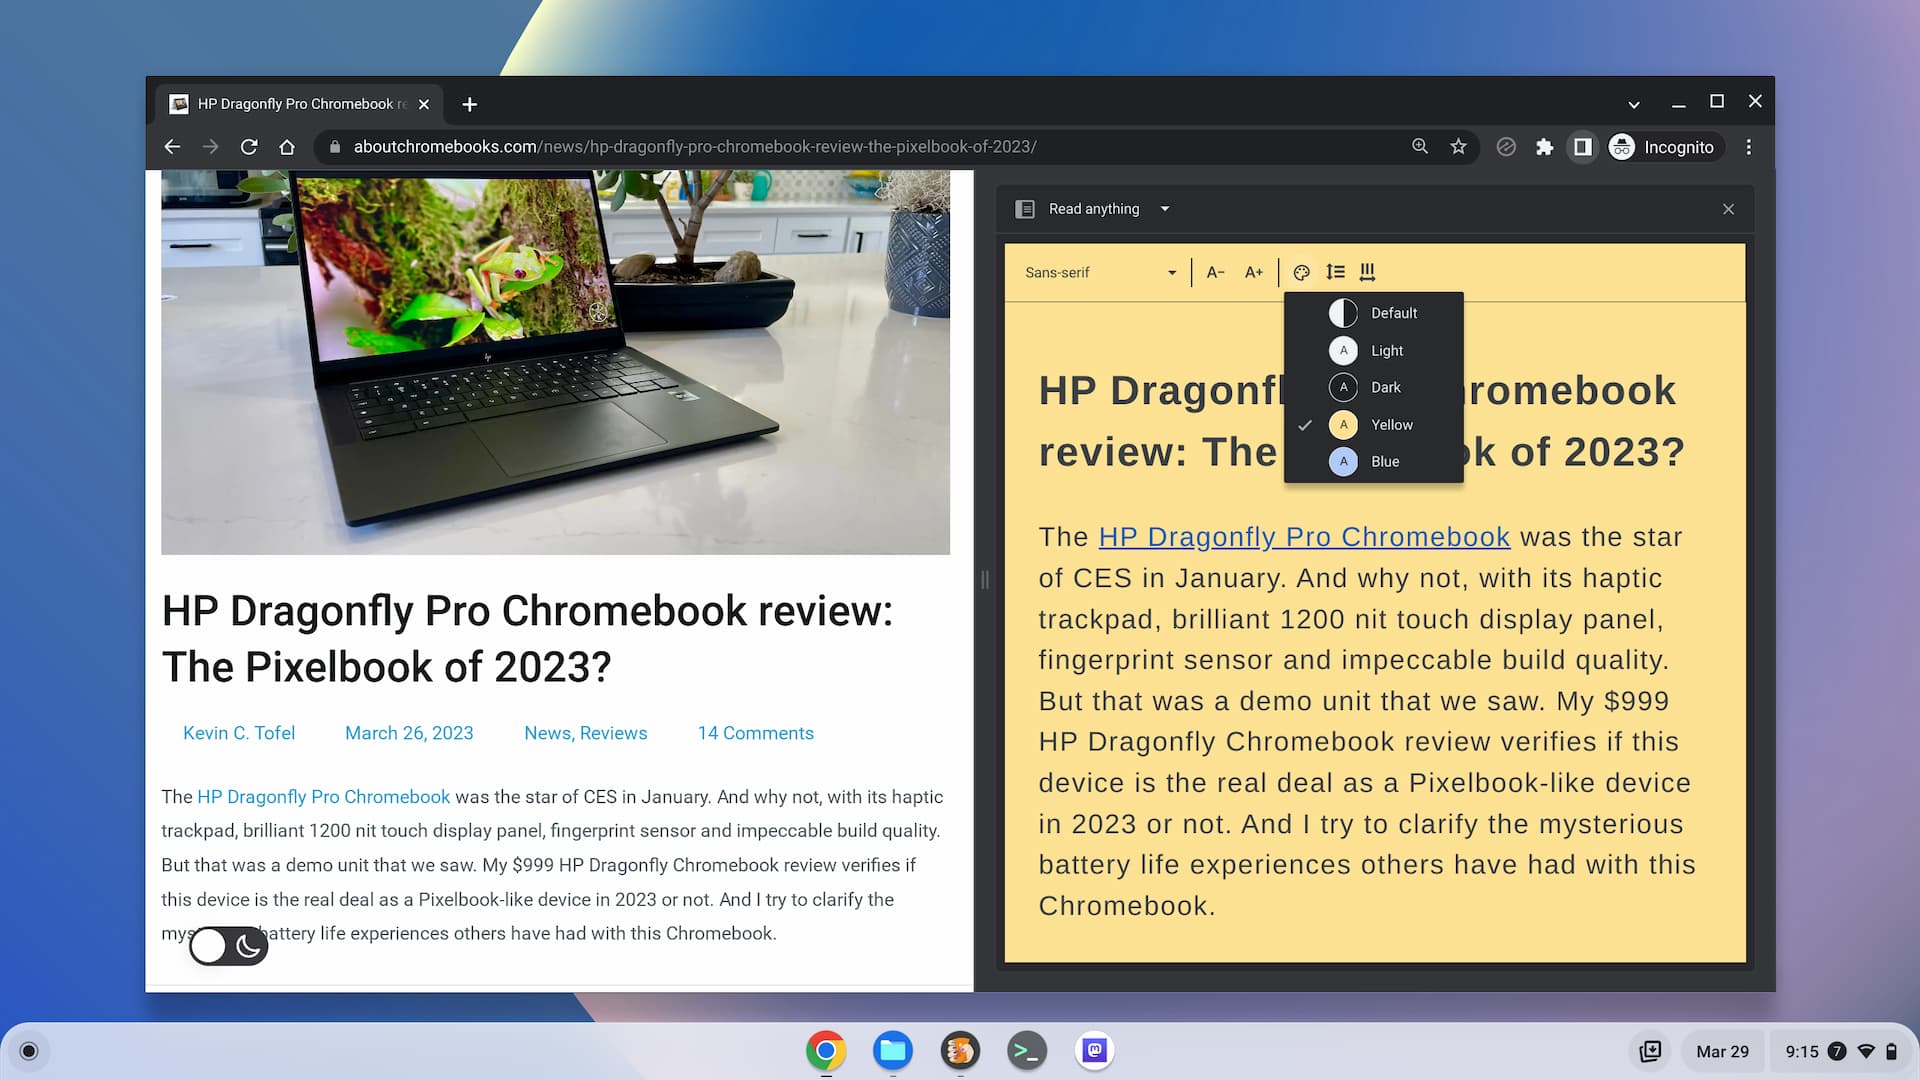 How to use Read Anything in the ChromeOS 111 side panel